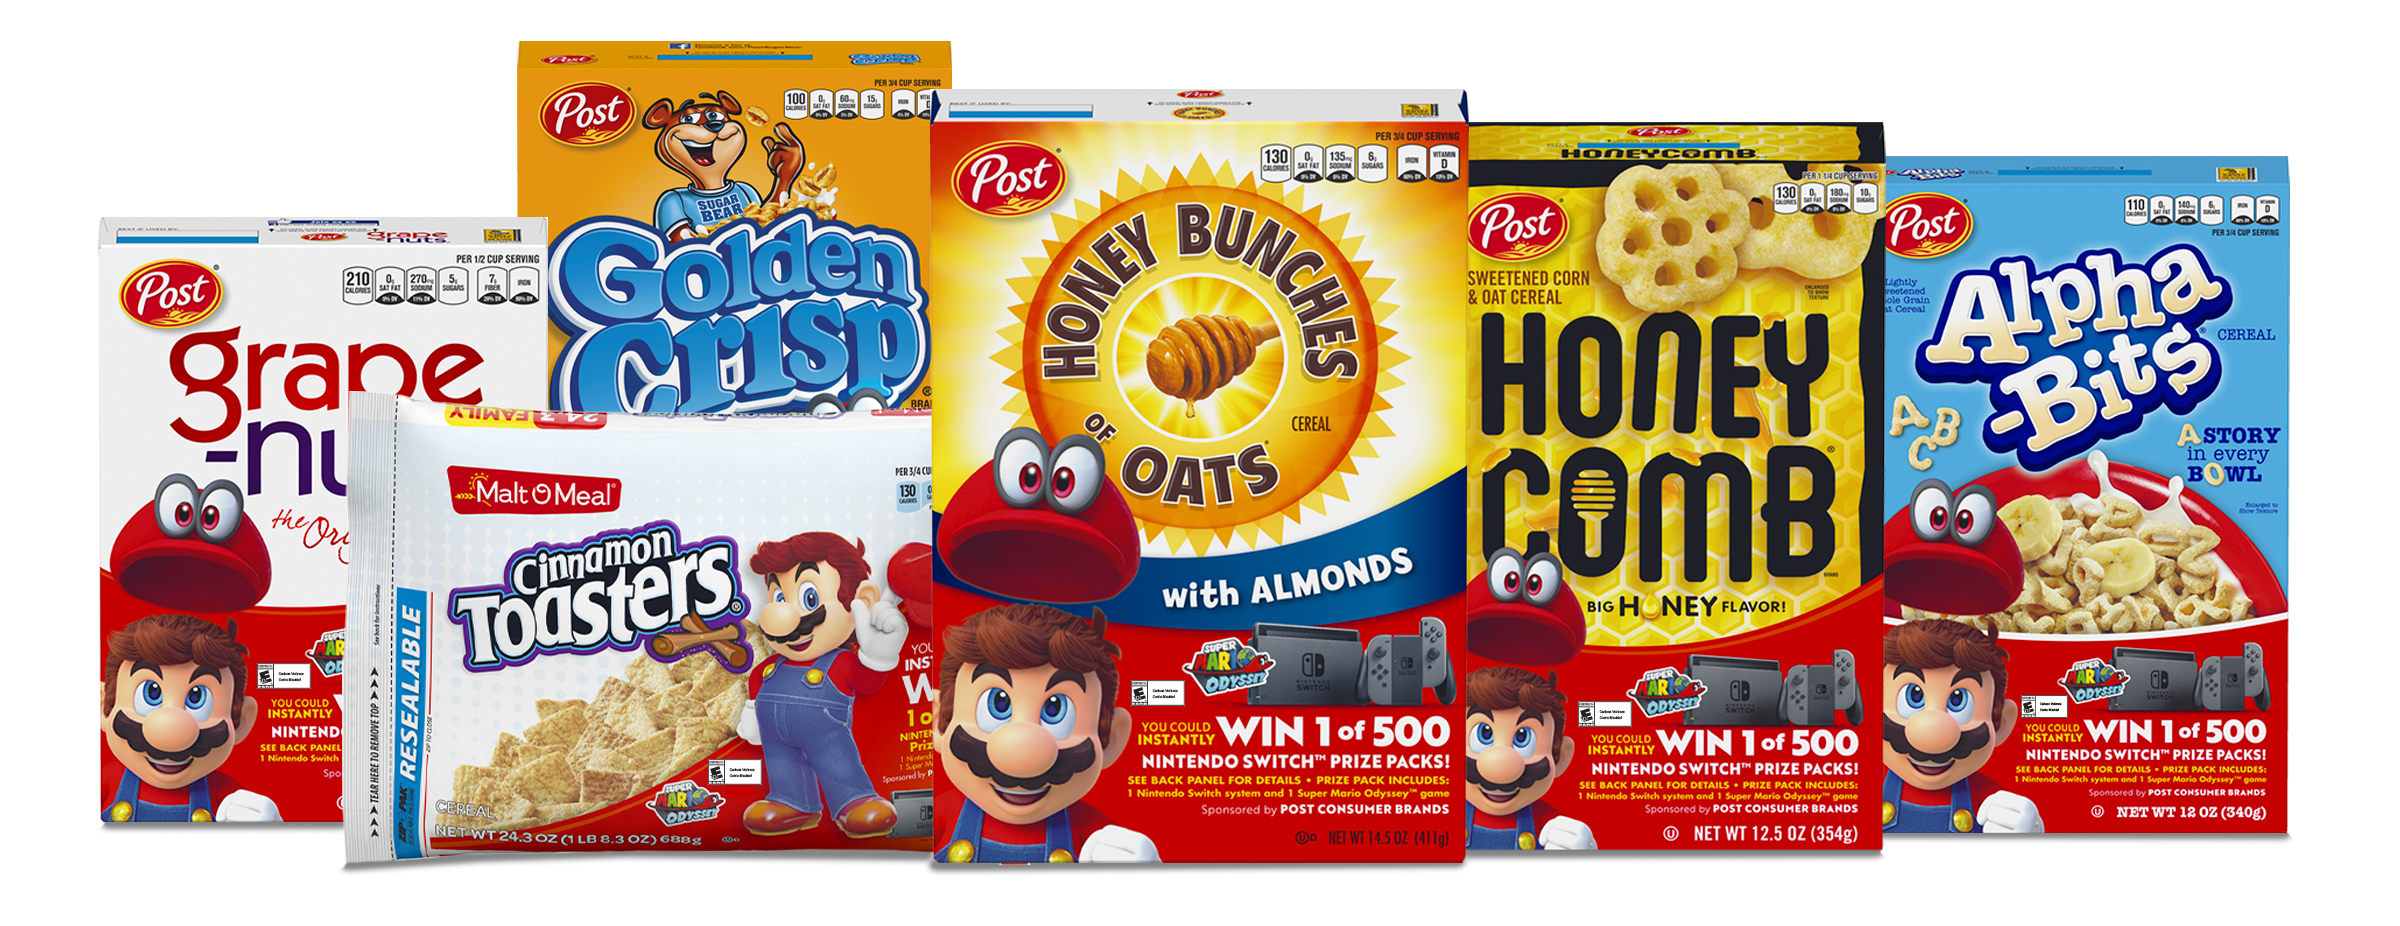 Some cereal. Nintendo Cereal. PLAYSTATION И Post Cereals. Super Mario Cereal. Cereal журнал.